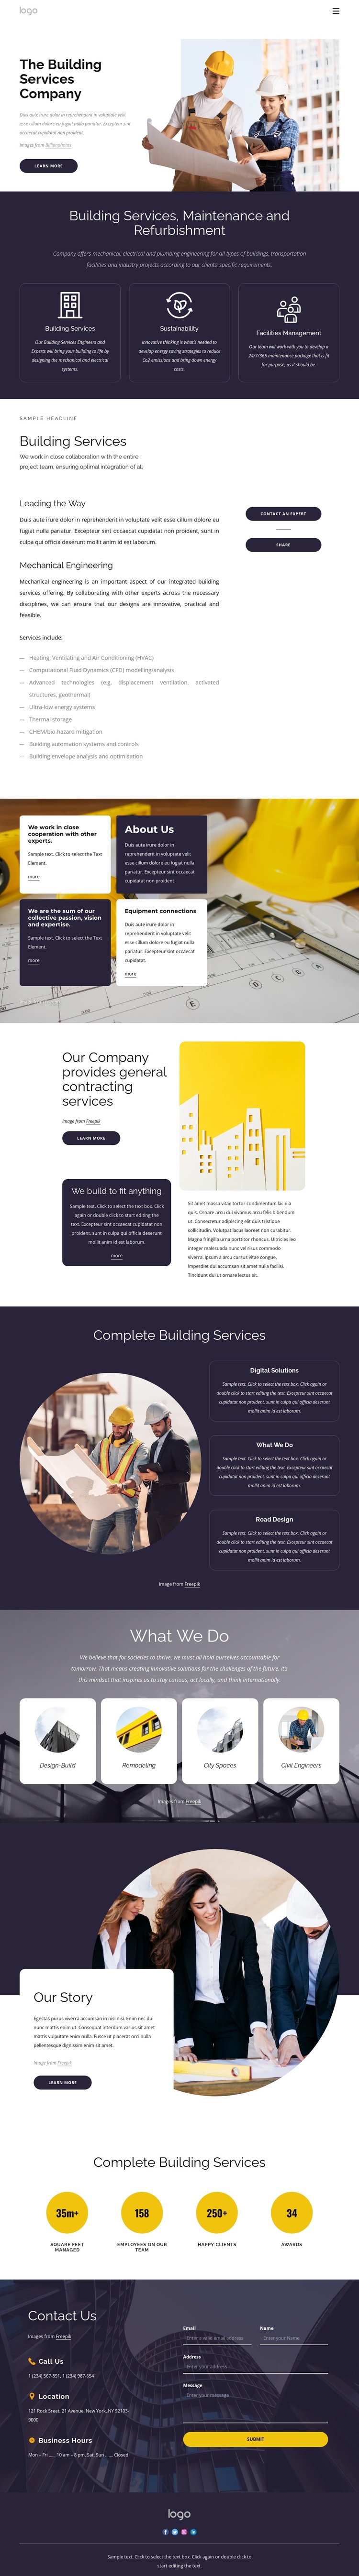 The building services company Website Builder Software